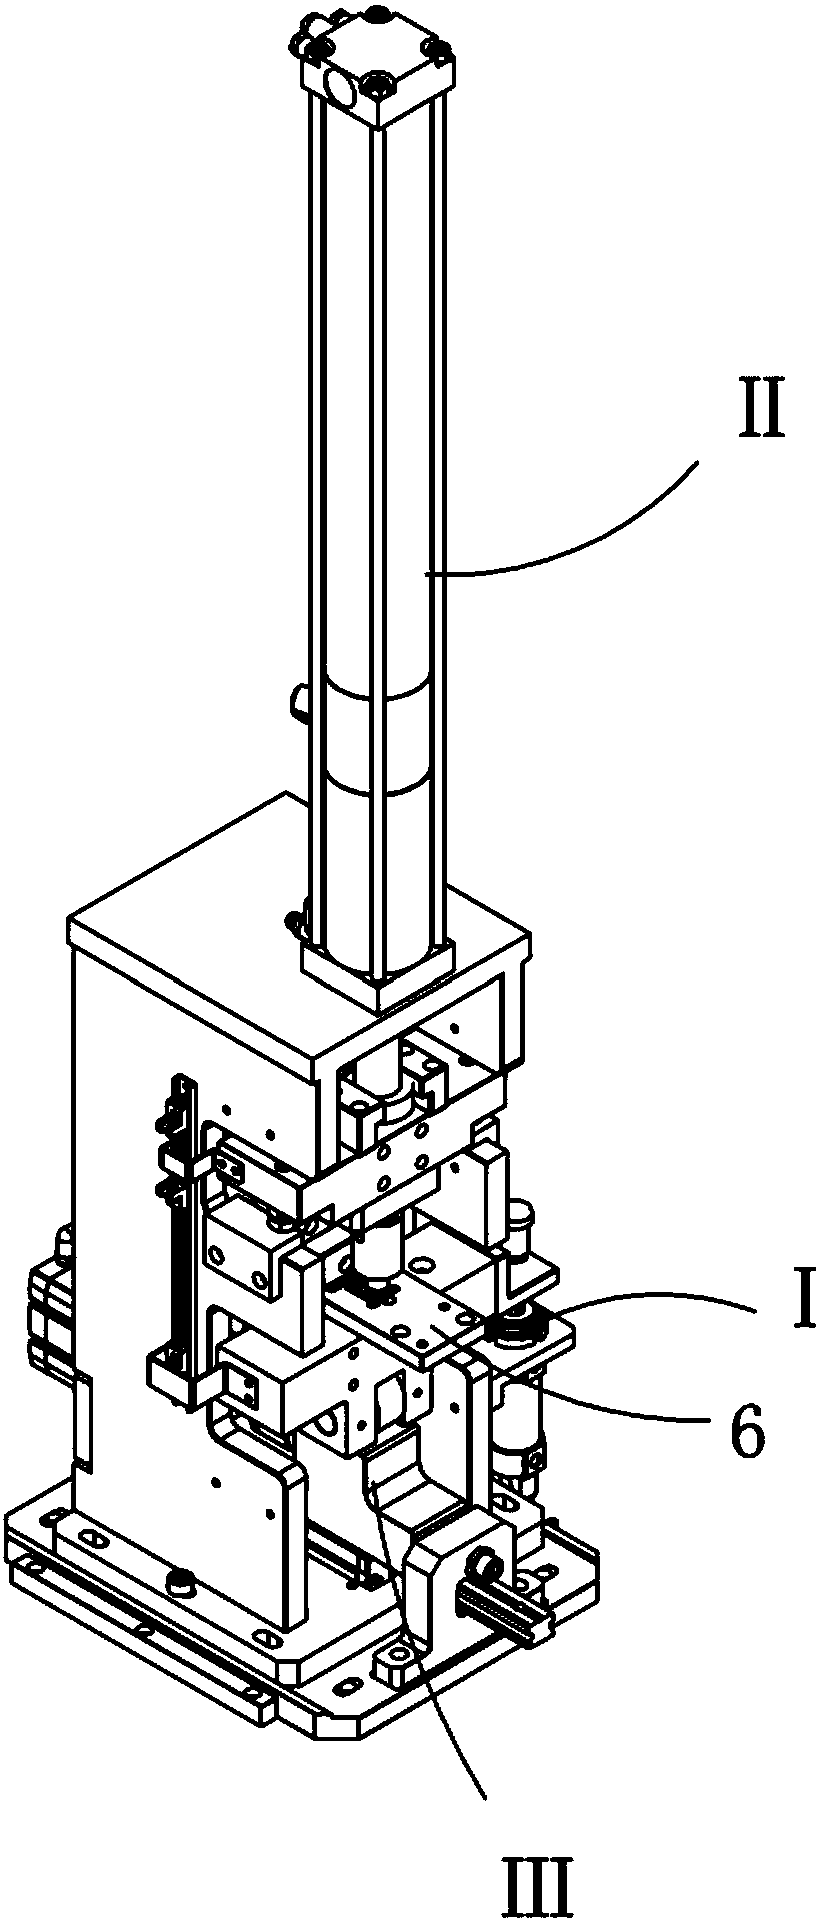 a pressing device